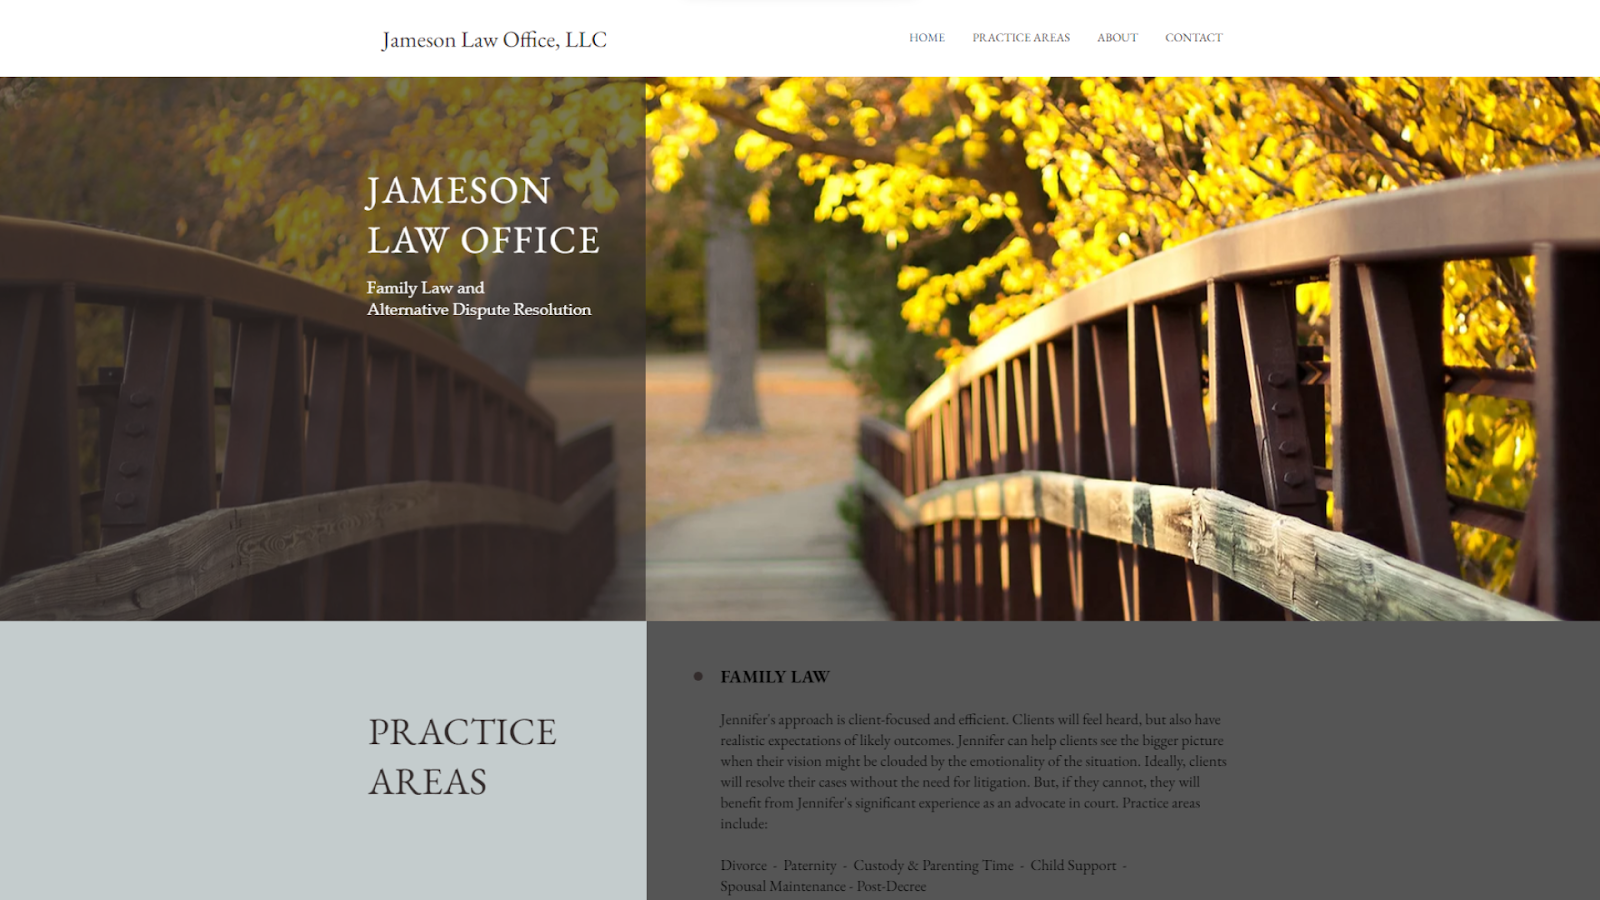 Screenshots from the Jameson Law Office website